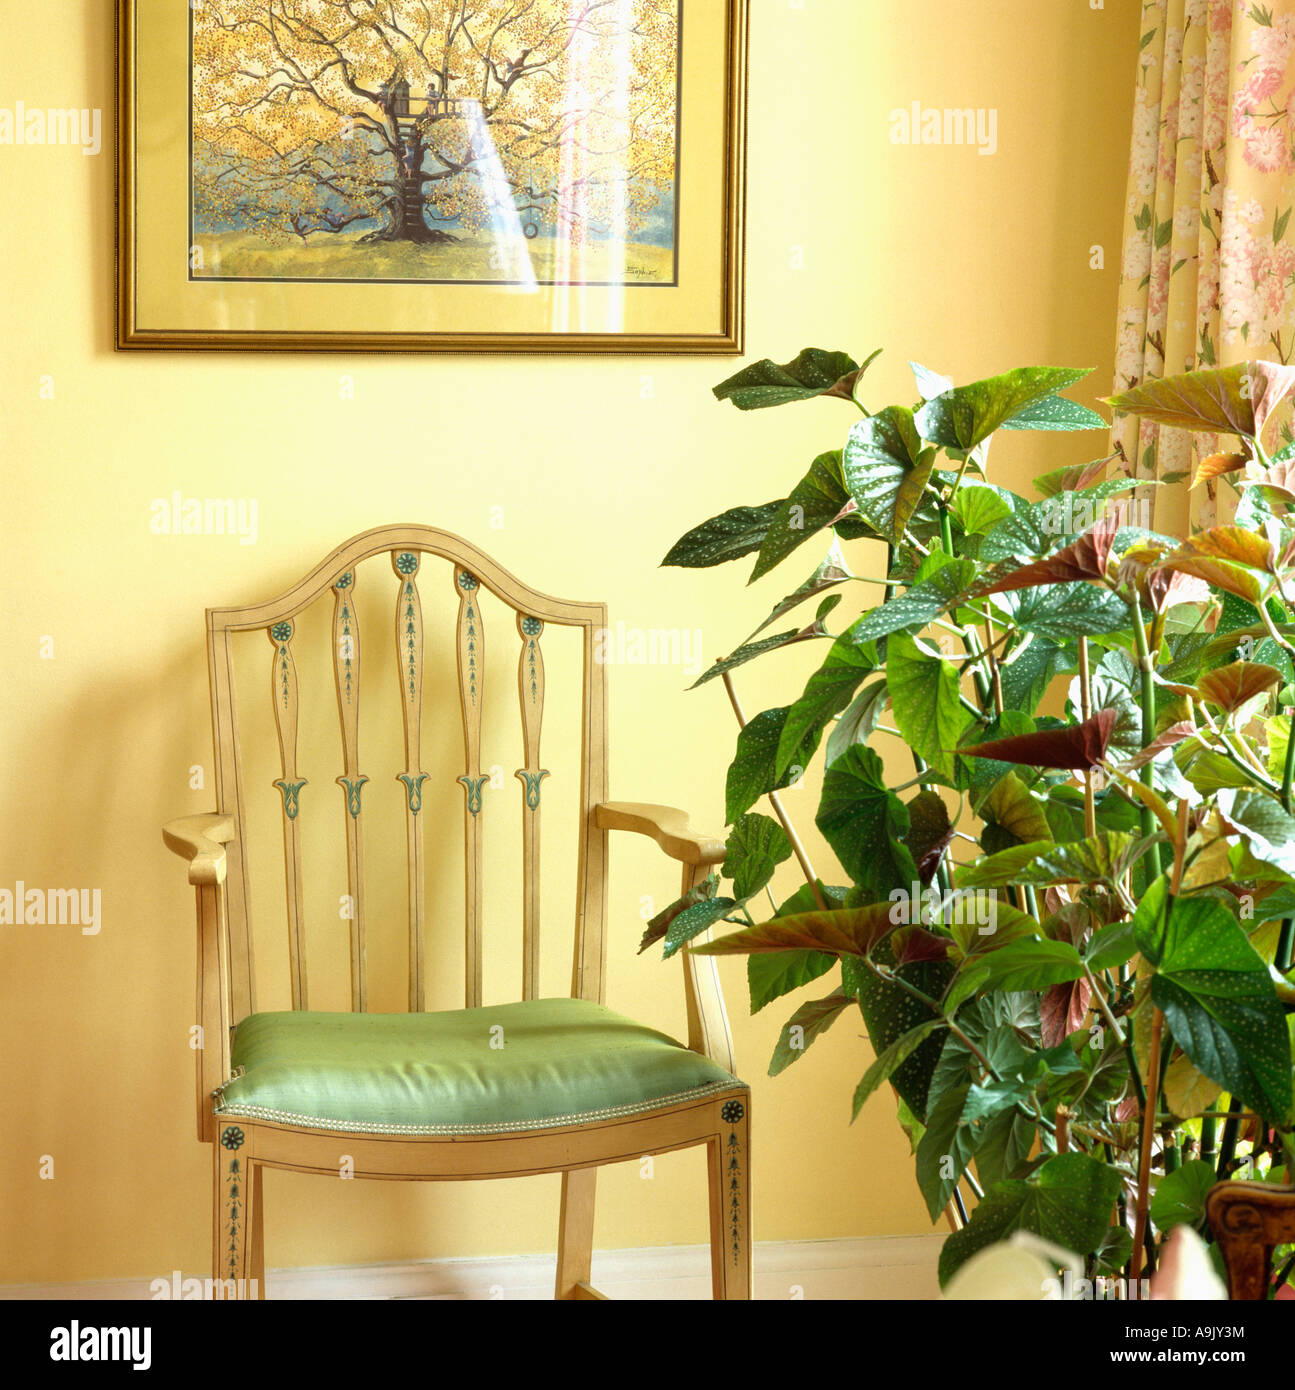 Decorative light wood chair with green cushion below picture on wall in corner of room with tall green begonia plant Stock Photo